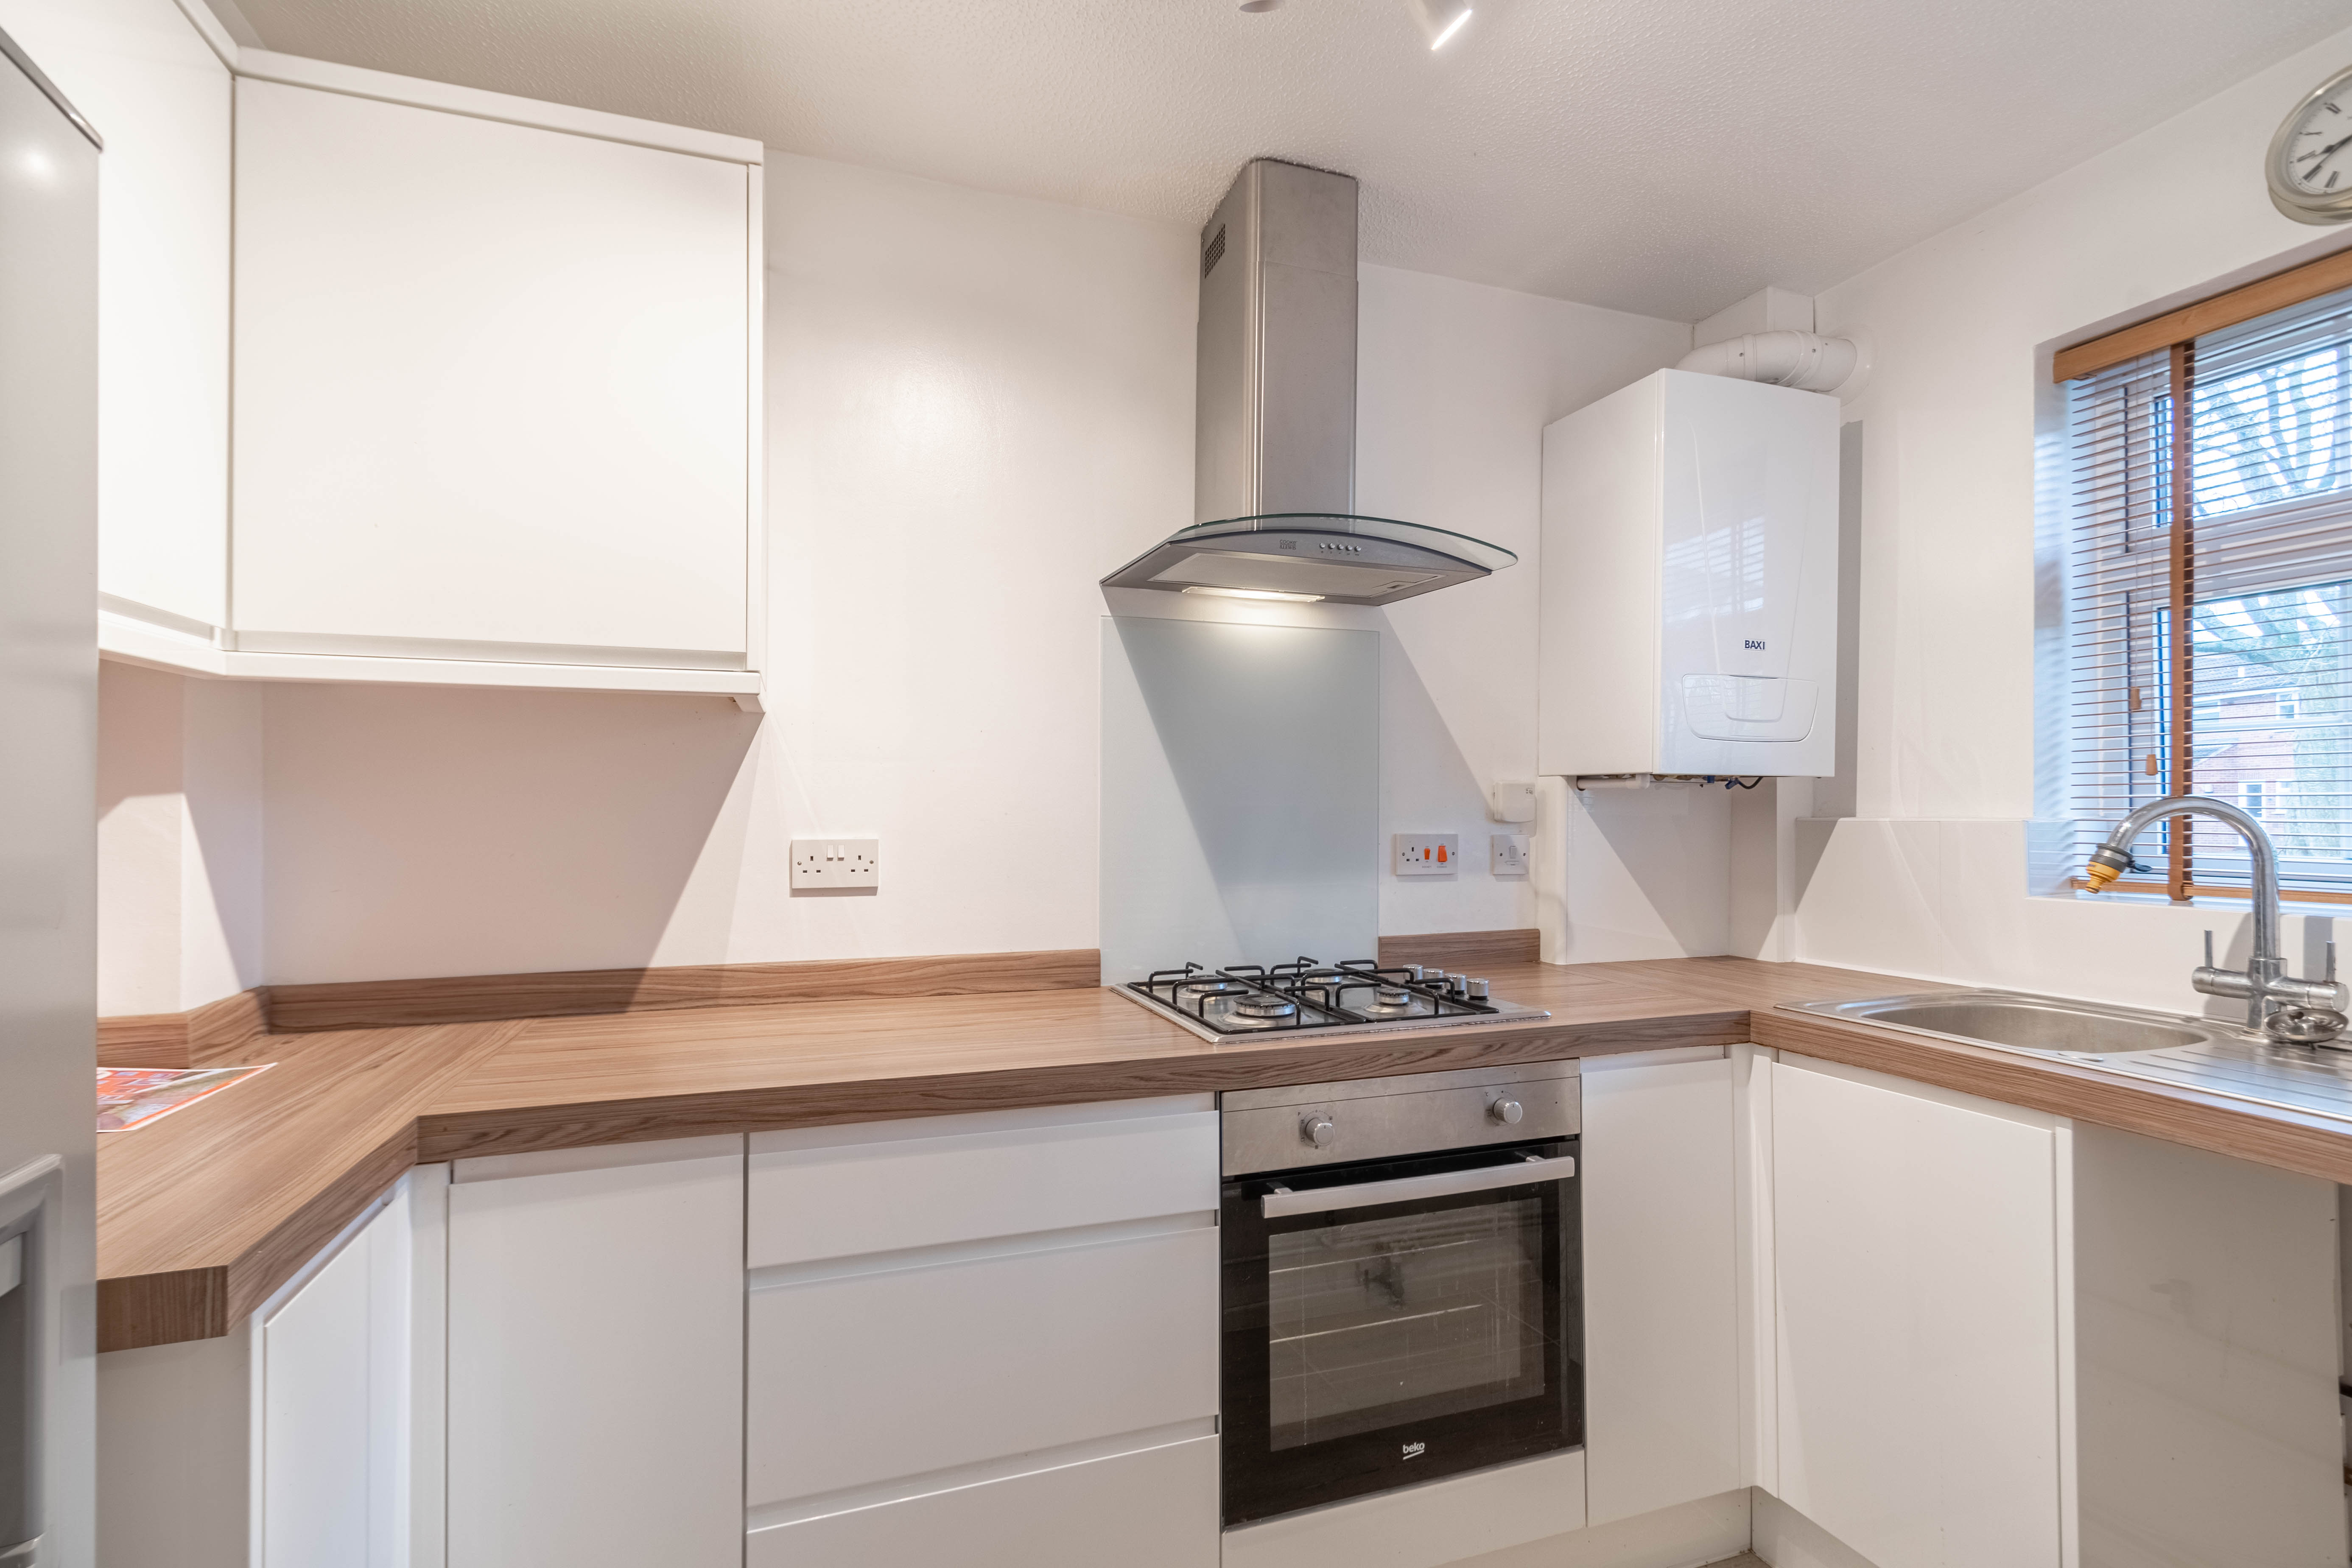 2 bed house for sale in Abbotswood Close, Winyates Green  - Property Image 15